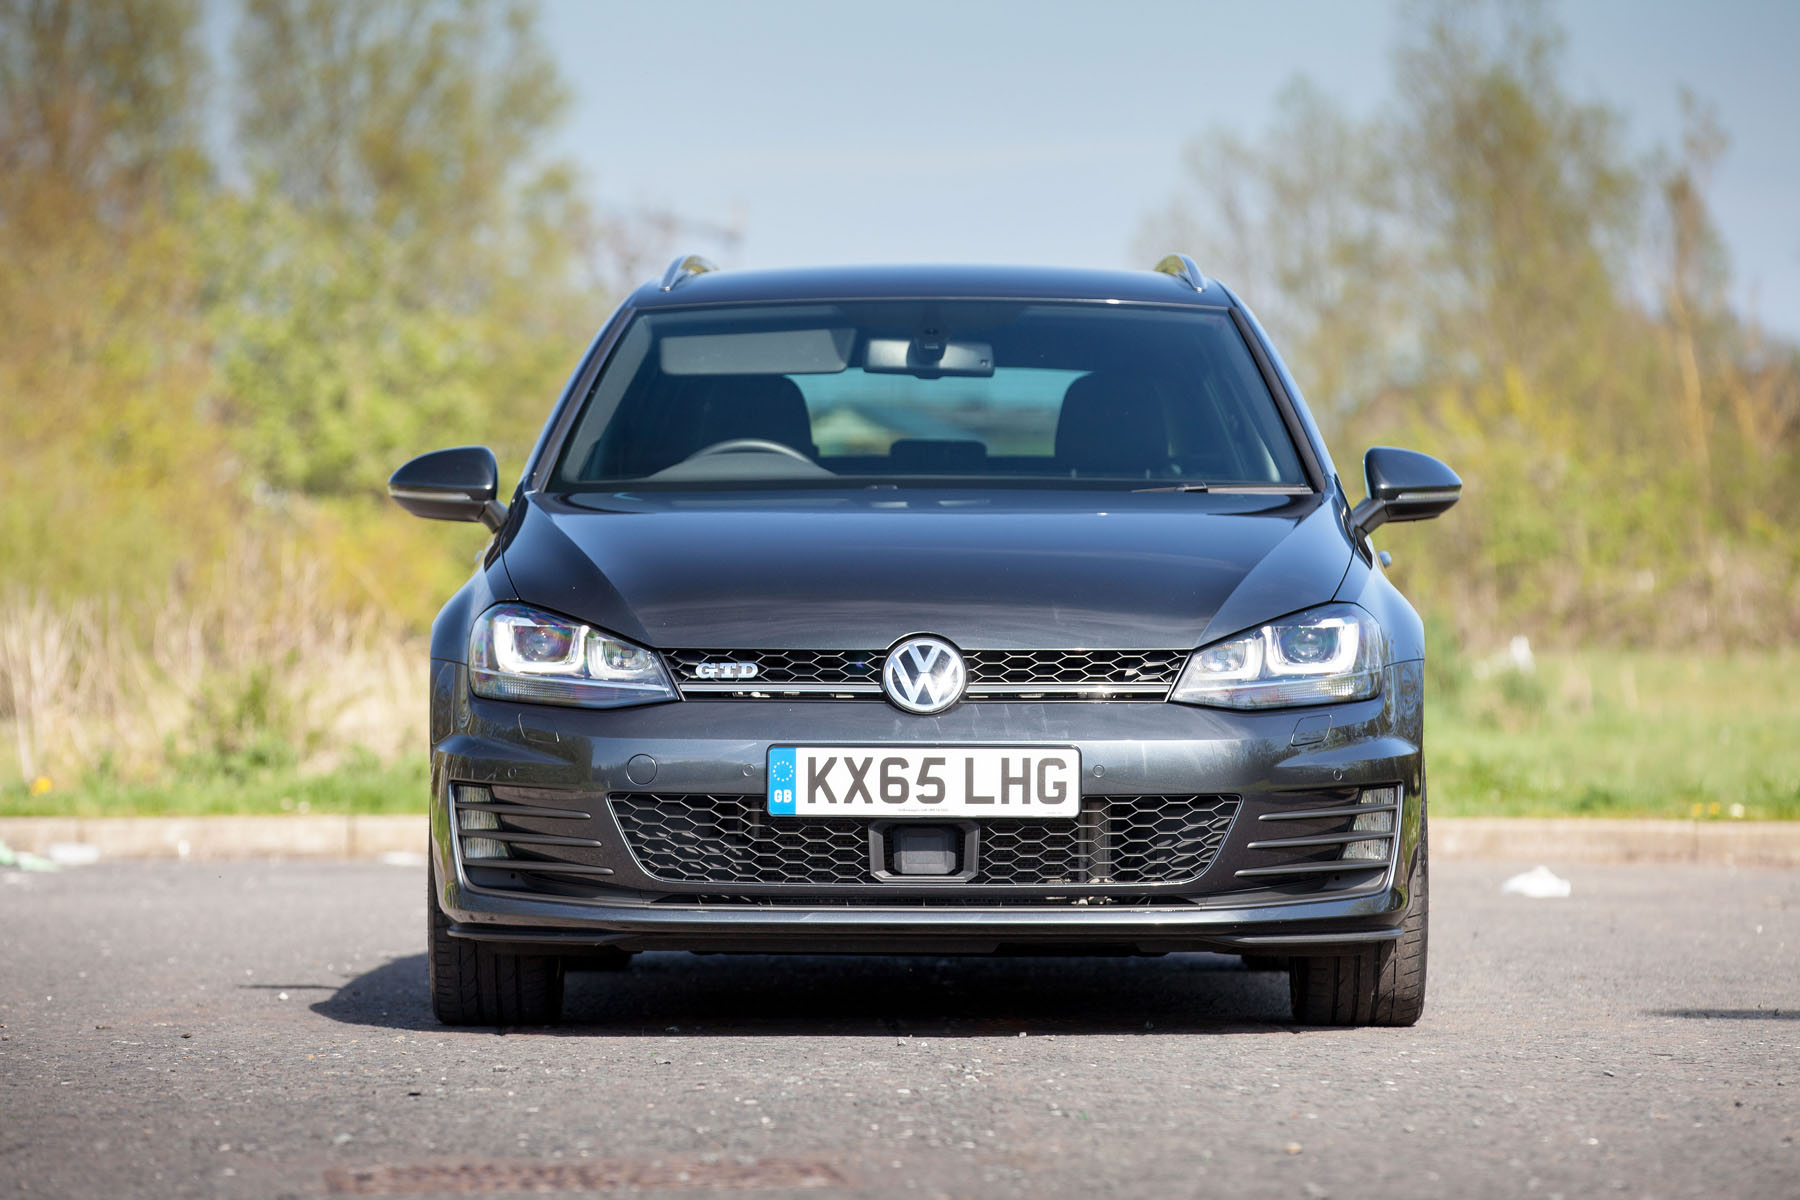 Volkswagen Golf GTD Estate, car review: Practicality allied with efficiency  and hot-hatch performance, The Independent